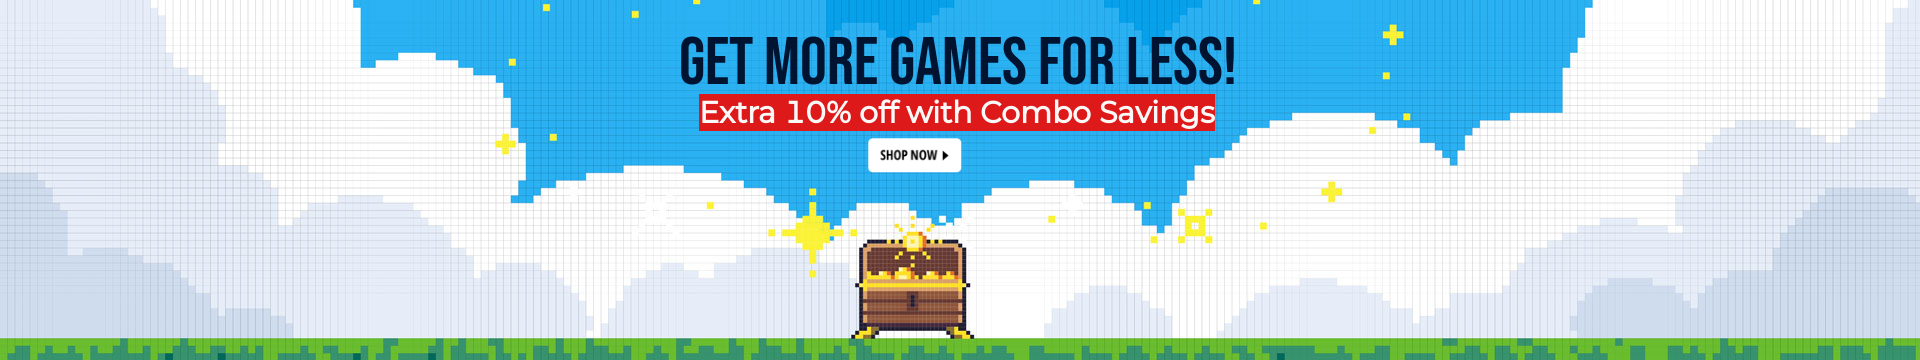 GET MORE GAMES FOR LESS